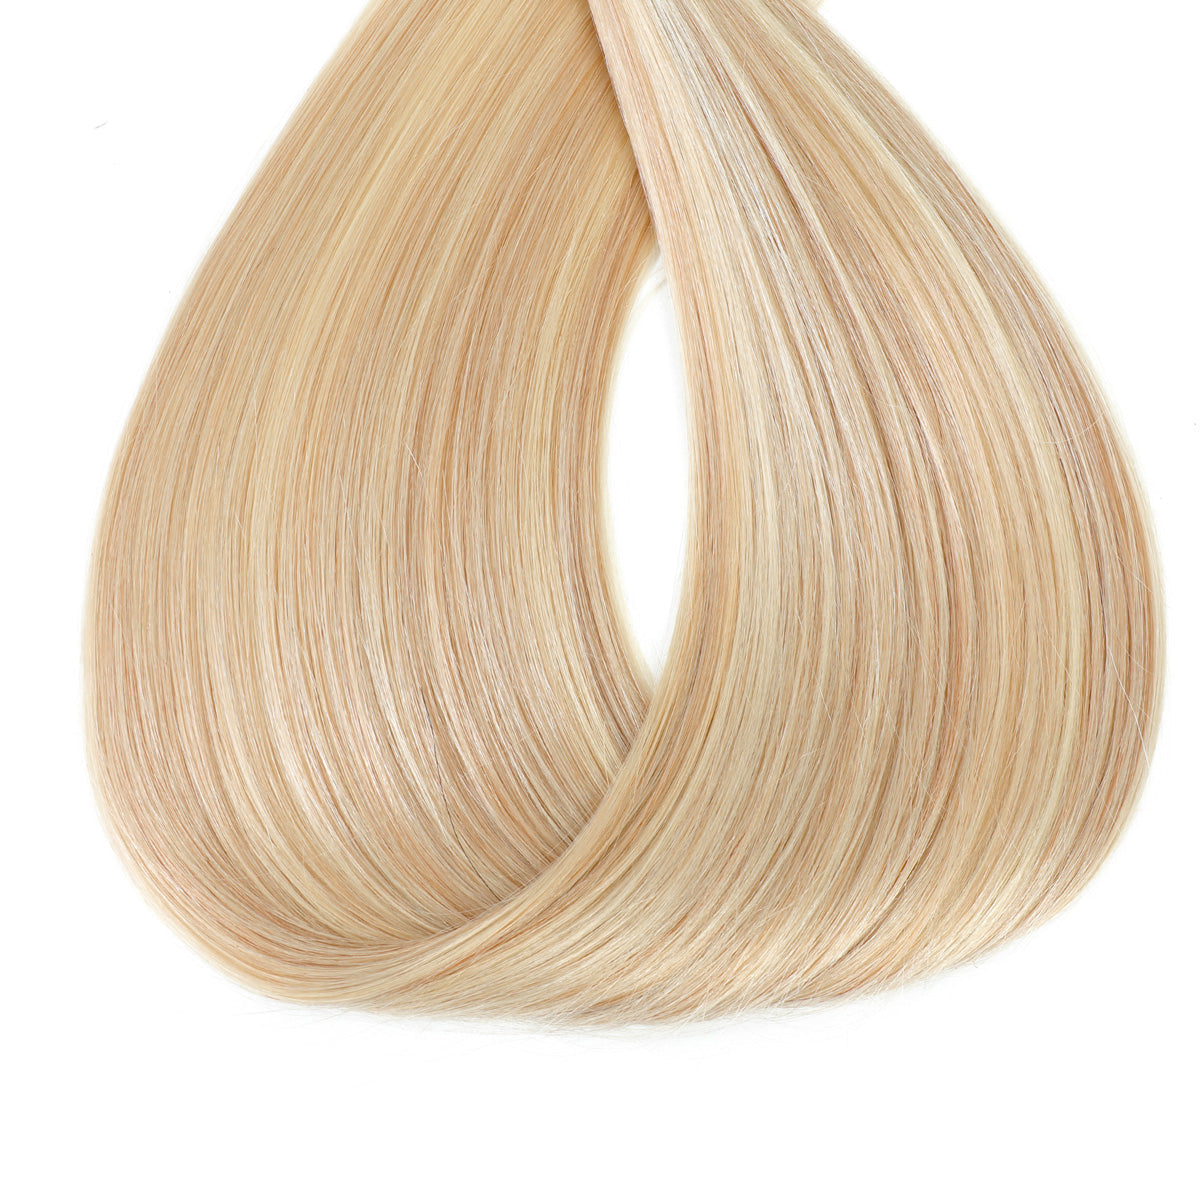 Professional Hair Extensions in Honey Blonde and Platinum Mix